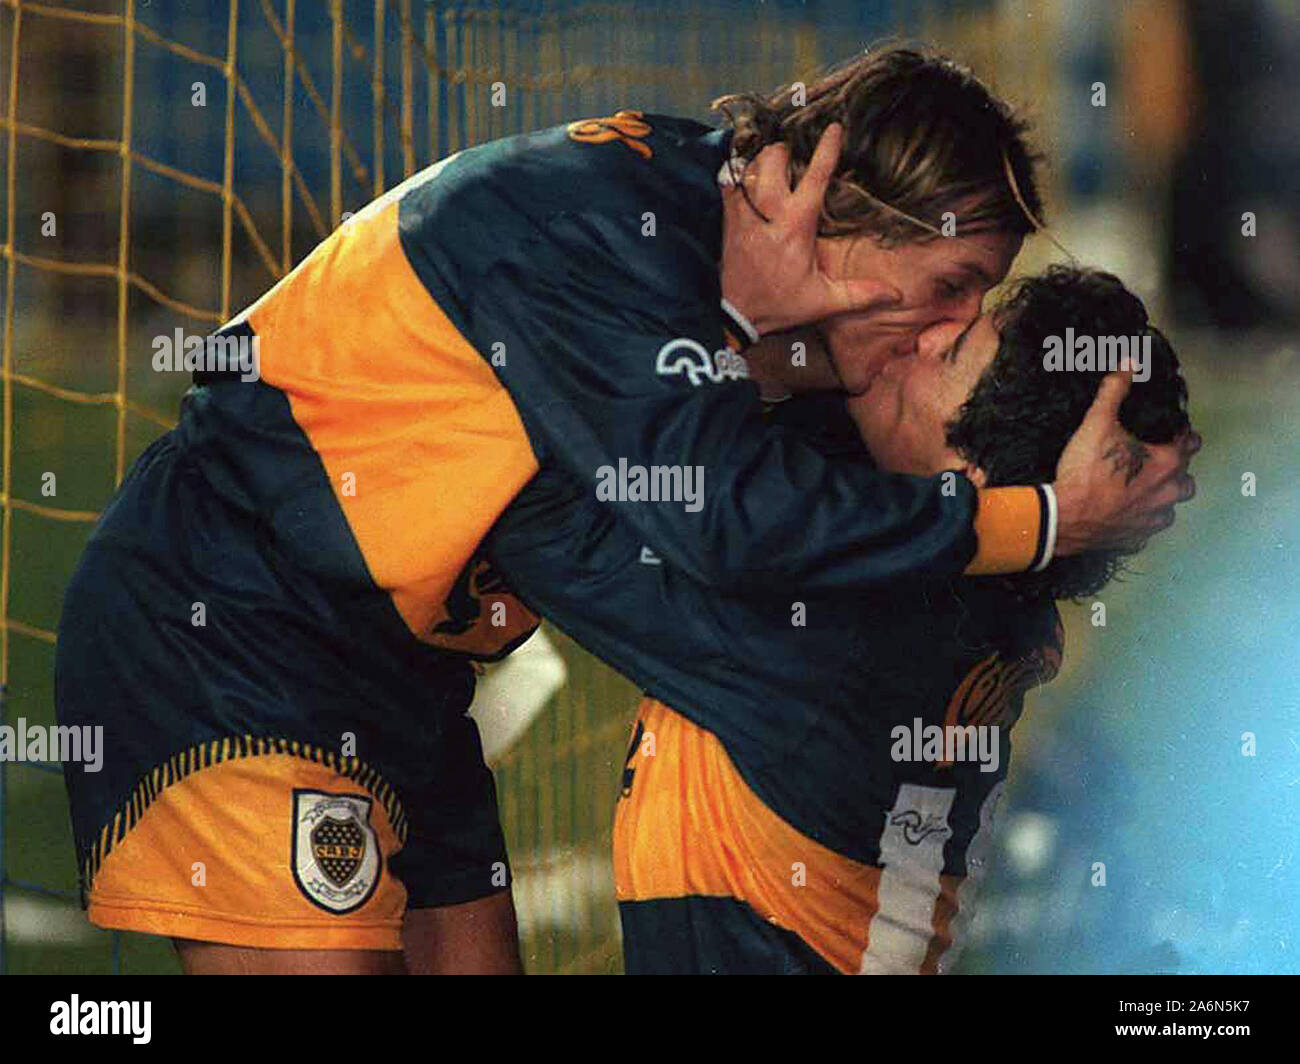 Diego Maradona and Claudio Paul Caniggia kissing after a goal, against River Plate, in the Bombonera Stadium Stock Photo